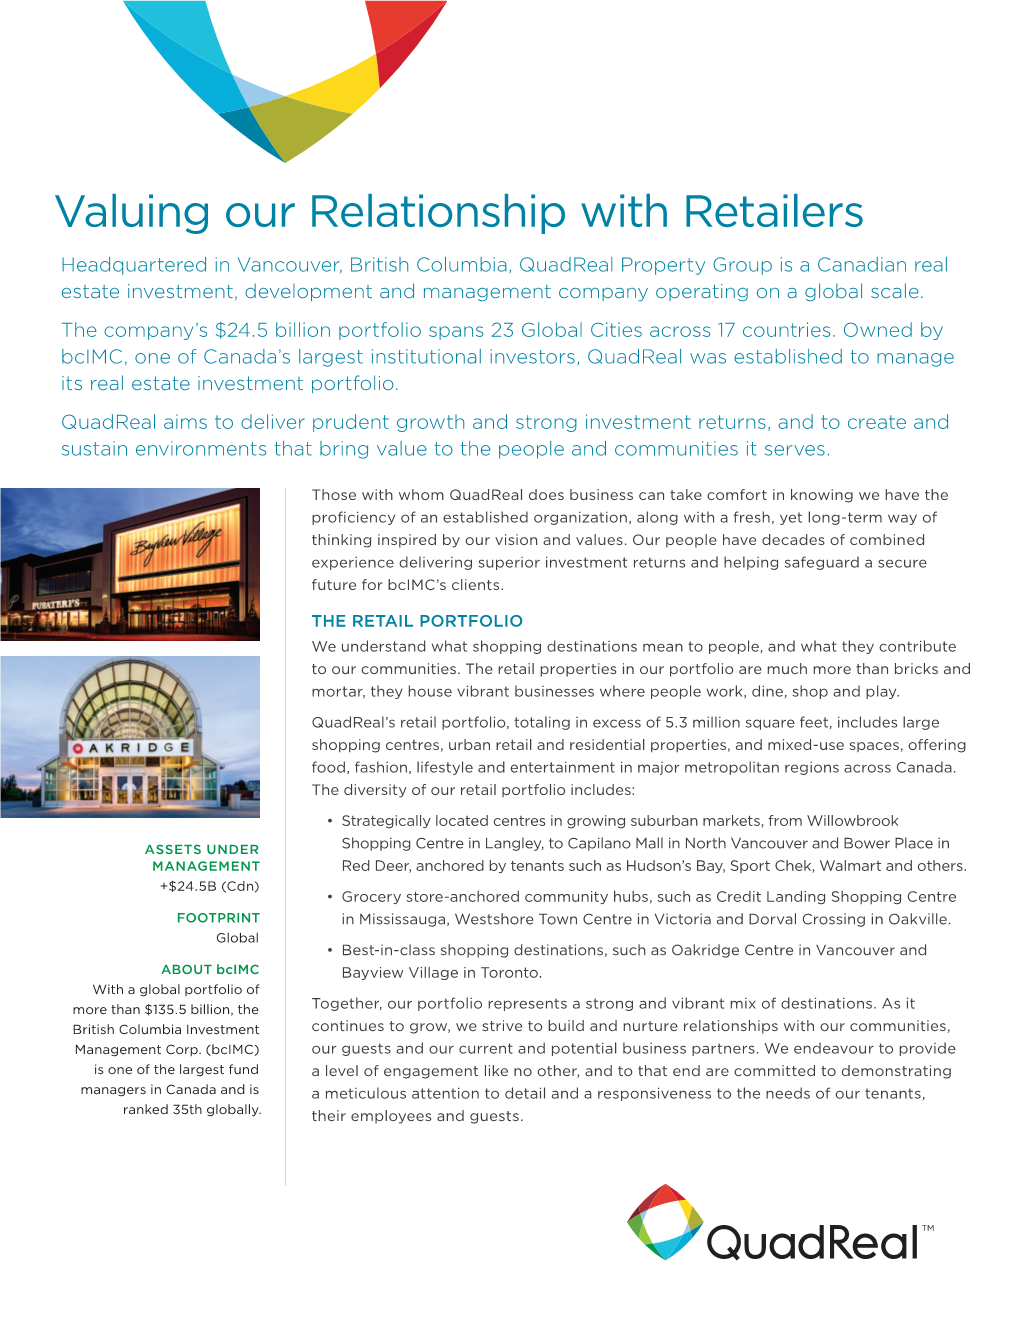 Valuing Our Relationship with Retailers